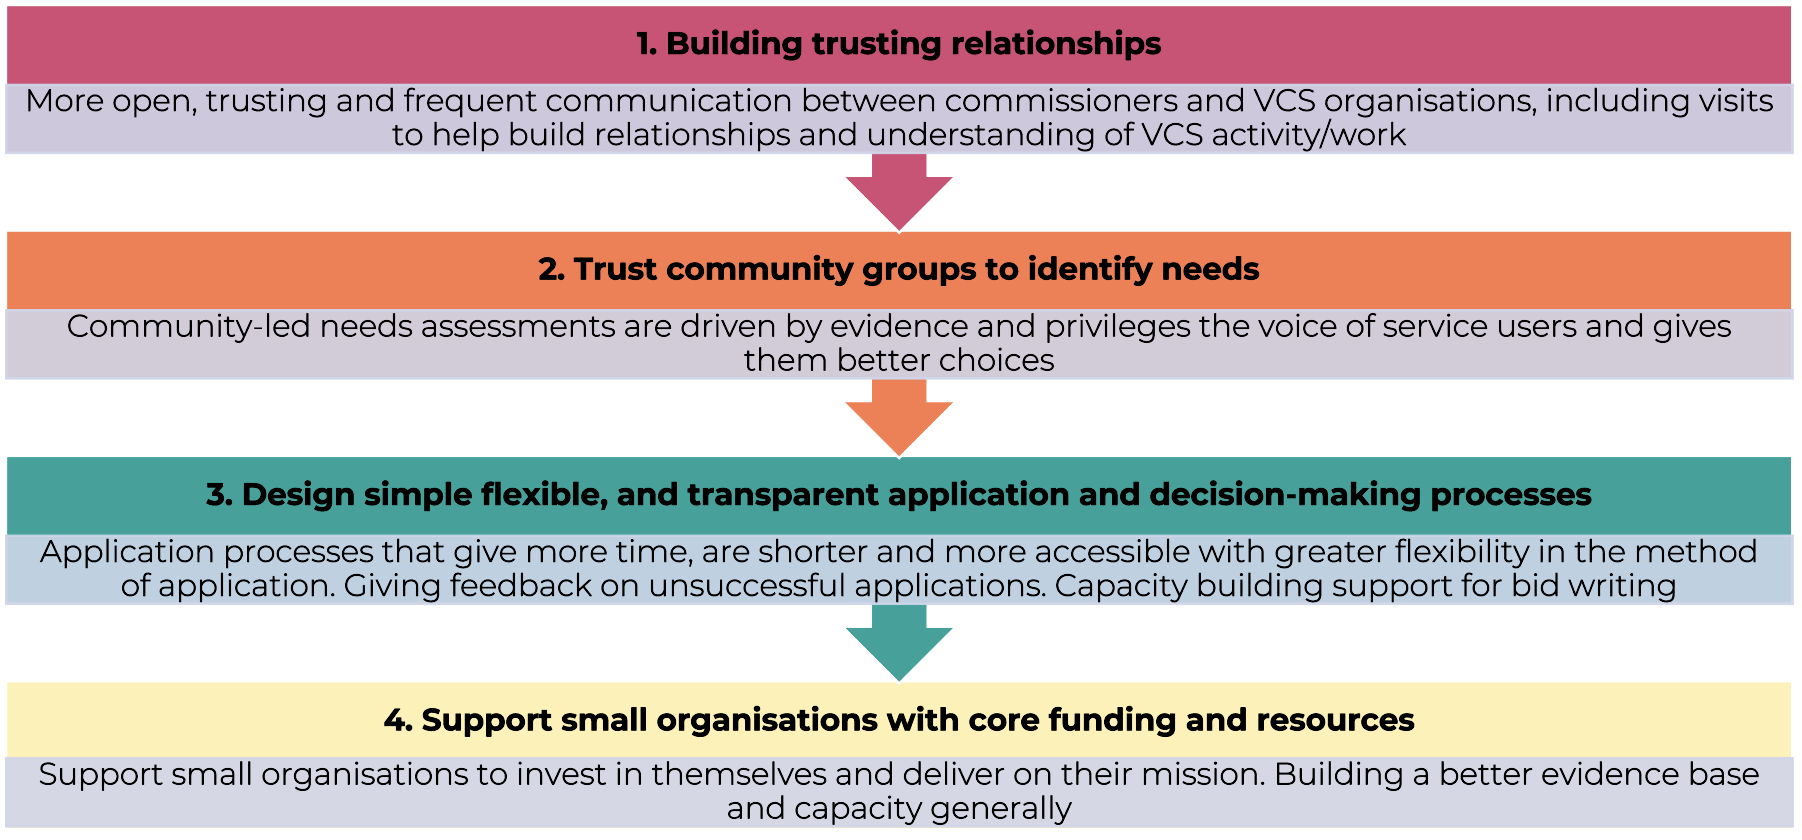 1. Building trusting relationships​: More open, trusting and frequent communication between commissioners and VCS organisations, including visits to help build relationships and understanding of VCS activity/work​ 2. Trust community groups to identify needs​: Community-led needs assessments are driven by evidence and privileges the voice of service users and gives them better choices​ 3. Design simple flexible, and transparent application and decision-making processes​: Application processes that give more time, are shorter and more accessible with greater flexibility in the method of application. Giving feedback on unsuccessful applications. Capacity building support for bid writing​ 4. Support small organisations with core funding and resources​: Support small organisations to invest in themselves and deliver on their mission. Building a better evidence base and capacity generally